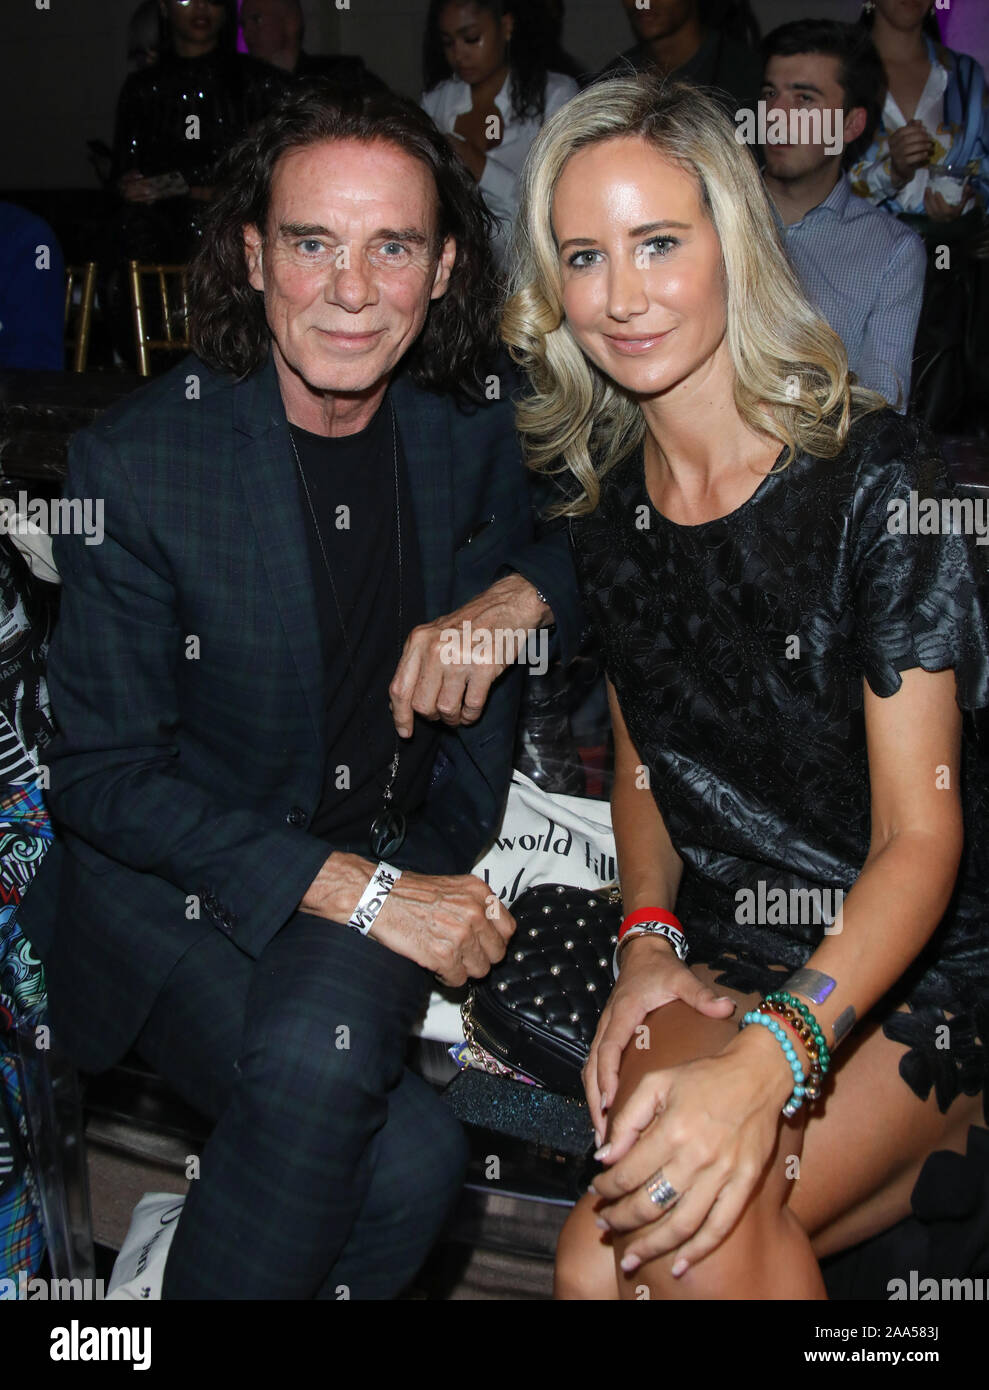 Los Angeles Fashion Week Powered by Art Hearts Fashion - Day 2 at The Majestic Downtown in Los Angeles, California on October 18, 2019 Featuring: George Blodwell, Lady Victoria Hervey Where: Los Angeles, California, United States When: 19 Oct 2019 Credit: Sheri Determan/WENN.com Stock Photo